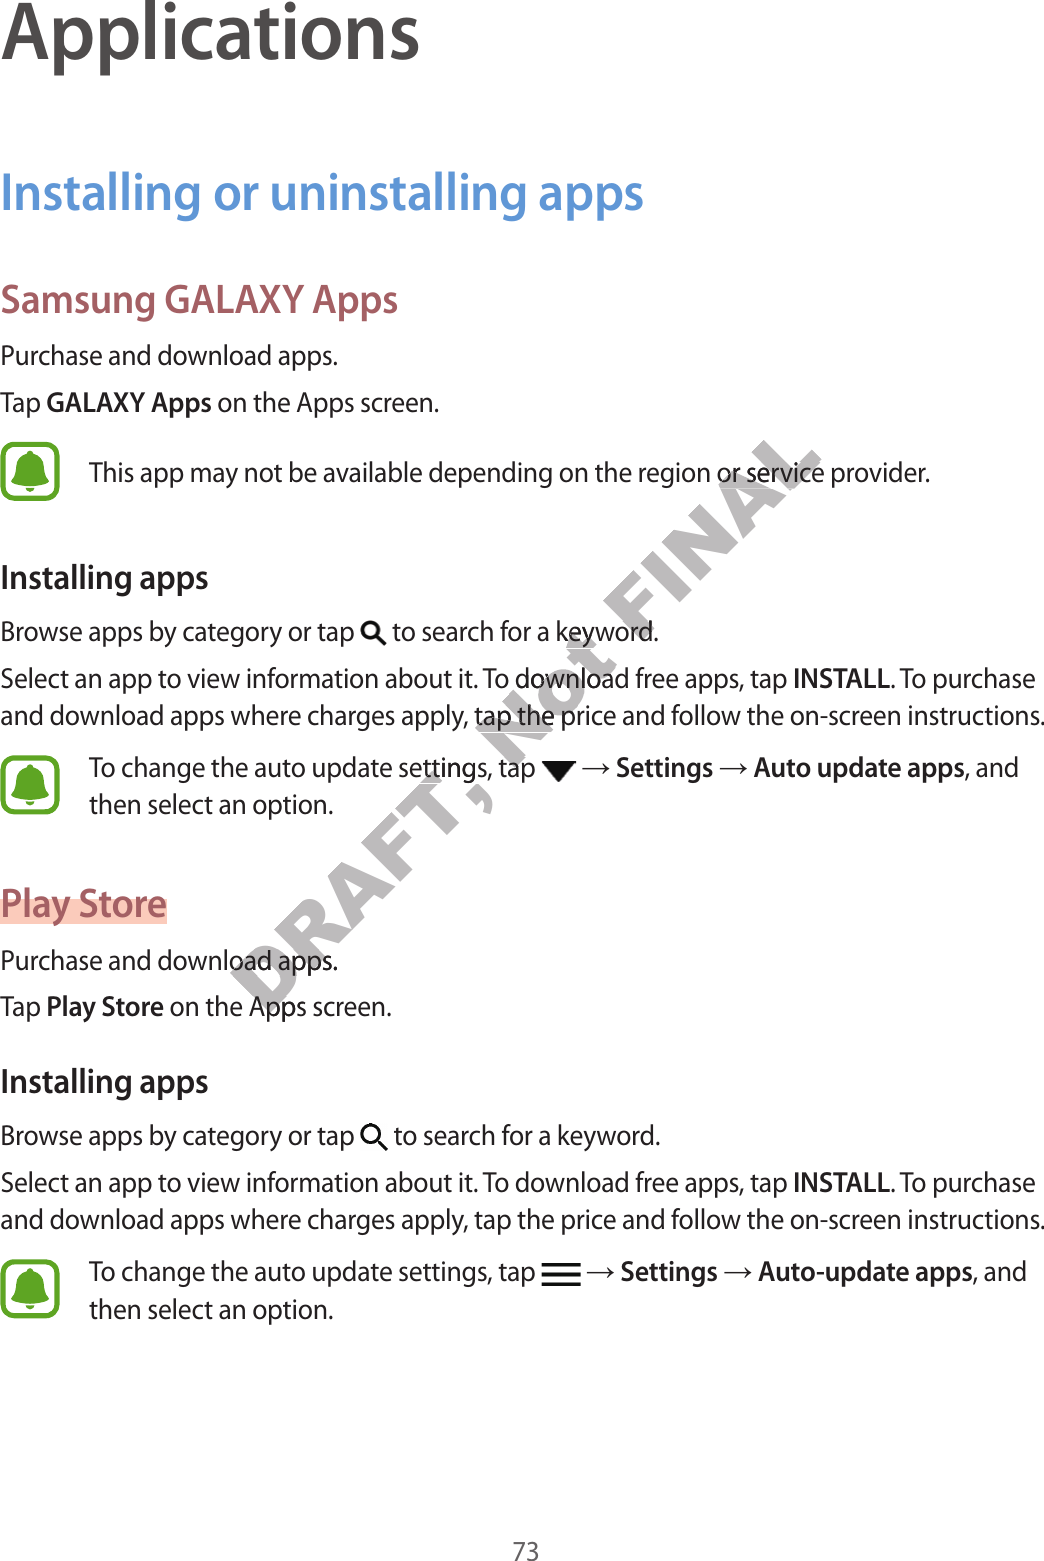 73ApplicationsInstalling or uninstalling appsSamsung GALAXY AppsPur chase and do wnload apps .Tap GALAXY Apps on the Apps screen.This app may not be a vailable depending on the r eg ion or service provider.Installing appsBrow se apps b y cat egory or tap   to search for a keywor d .Select an app to view inf ormation about it. To download free apps, tap INSTALL. To purchase and download apps where char ges apply, tap the price and follo w the on-scr een instructions.To change the auto update settings , tap    Settings  Aut o updat e apps, and then select an option.Pla y St orePur chase and do wnload apps .Tap Play St or e on the Apps screen.Installing appsBrow se apps b y cat egory or tap   to search for a keyword .Select an app to view inf ormation about it. To download free apps, tap INSTALL. To purchase and download apps where char ges apply, tap the price and follo w the on-scr een instructions.To change the auto update settings , tap    Settings  Aut o-update apps, and then select an option.DRAFT, To change the auto update settings , tap DRAFT, To change the auto update settings , tap Pur chase and do wnload apps .DRAFT, Pur chase and do wnload apps .DRAFT,  on the Apps screen.DRAFT,  on the Apps screen.Not  to search for a keyword .Not  to search for a keyword .Select an app to view inf ormation about it. To download free apps, tap Not Select an app to view inf ormation about it. To download free apps, tap and download apps where char ges apply, tap the price and follo w the on-scr een instructions.Not and download apps where char ges apply, tap the price and follo w the on-scr een instructions.To change the auto update settings , tap Not To change the auto update settings , tap FINALThis app may not be a vailable depending on the r eg ion or service provider.FINALThis app may not be a vailable depending on the r eg ion or service provider. to search for a keyword .FINAL to search for a keyword .